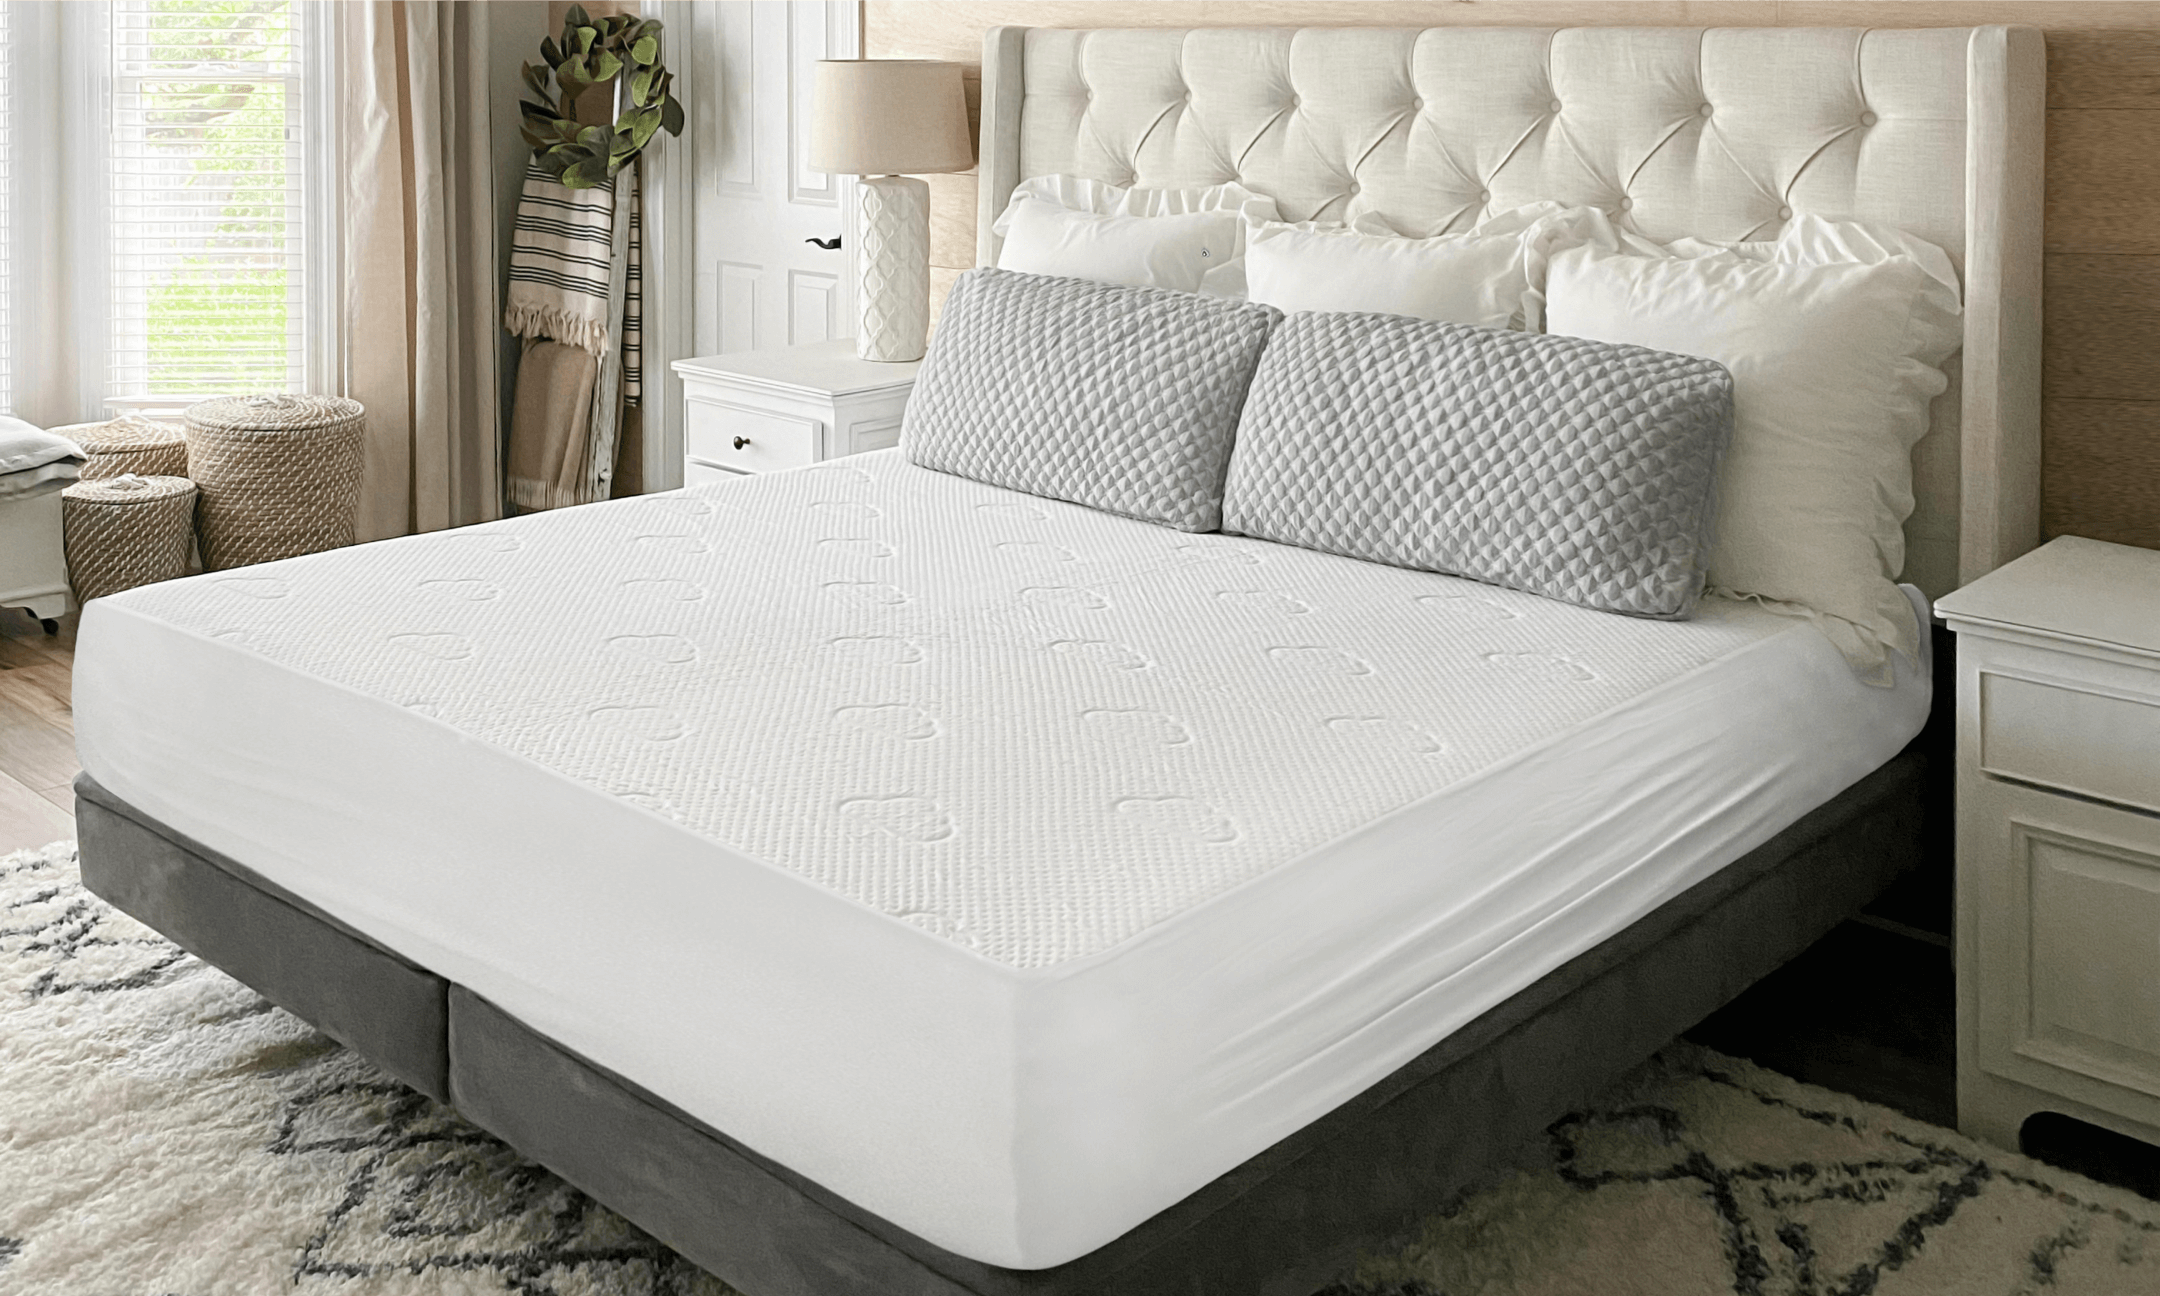 What Is a Mattress Protector? How it works, and how to maintain it